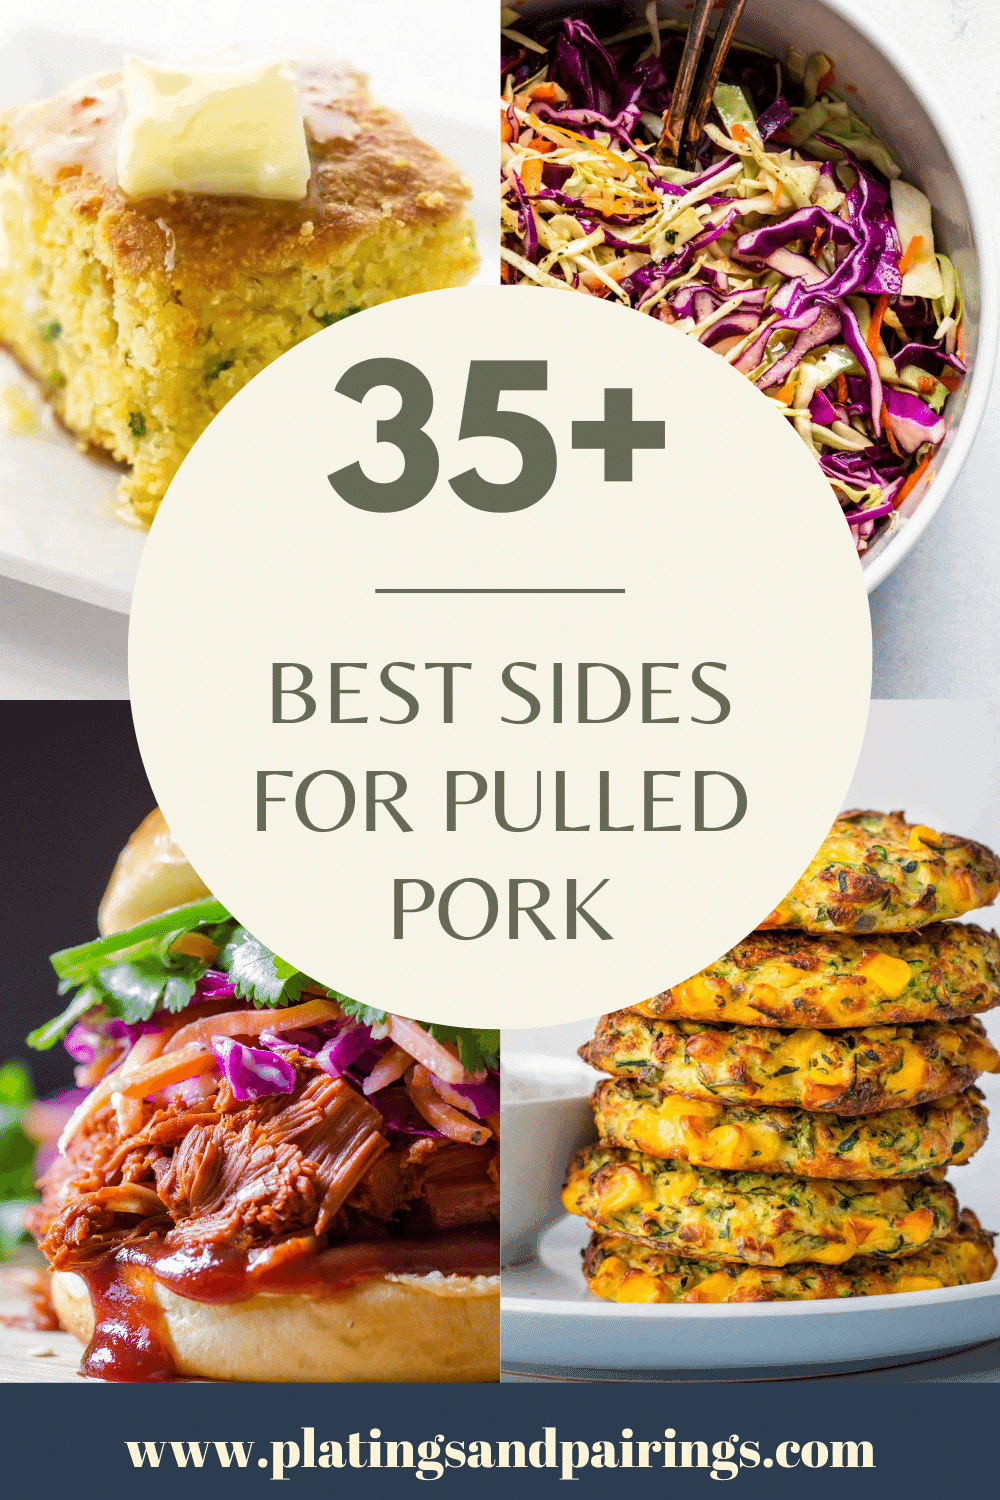 Collage of sides for pulled pork with text overlay.